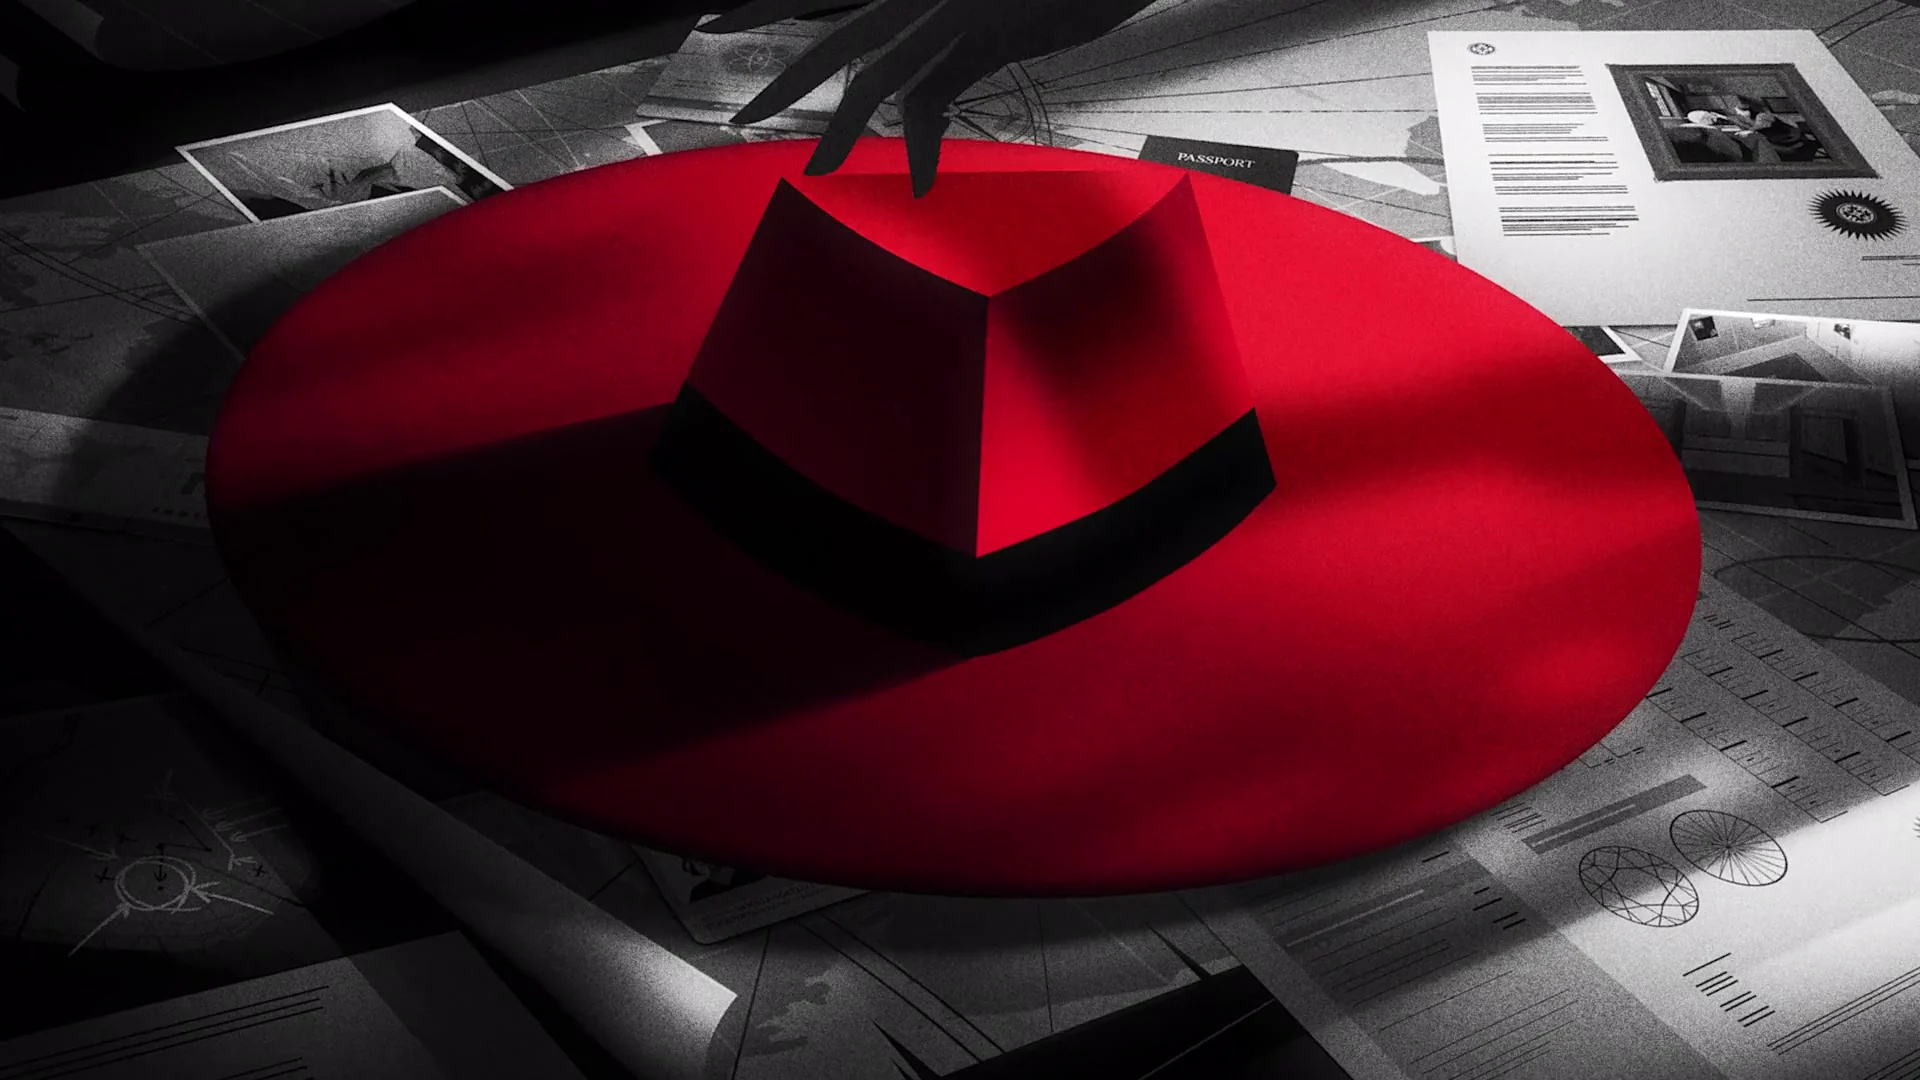 Carmen Sandiego: The character is known for wearing a red trench coat and matching fedora. 1920x1080 Full HD Background.